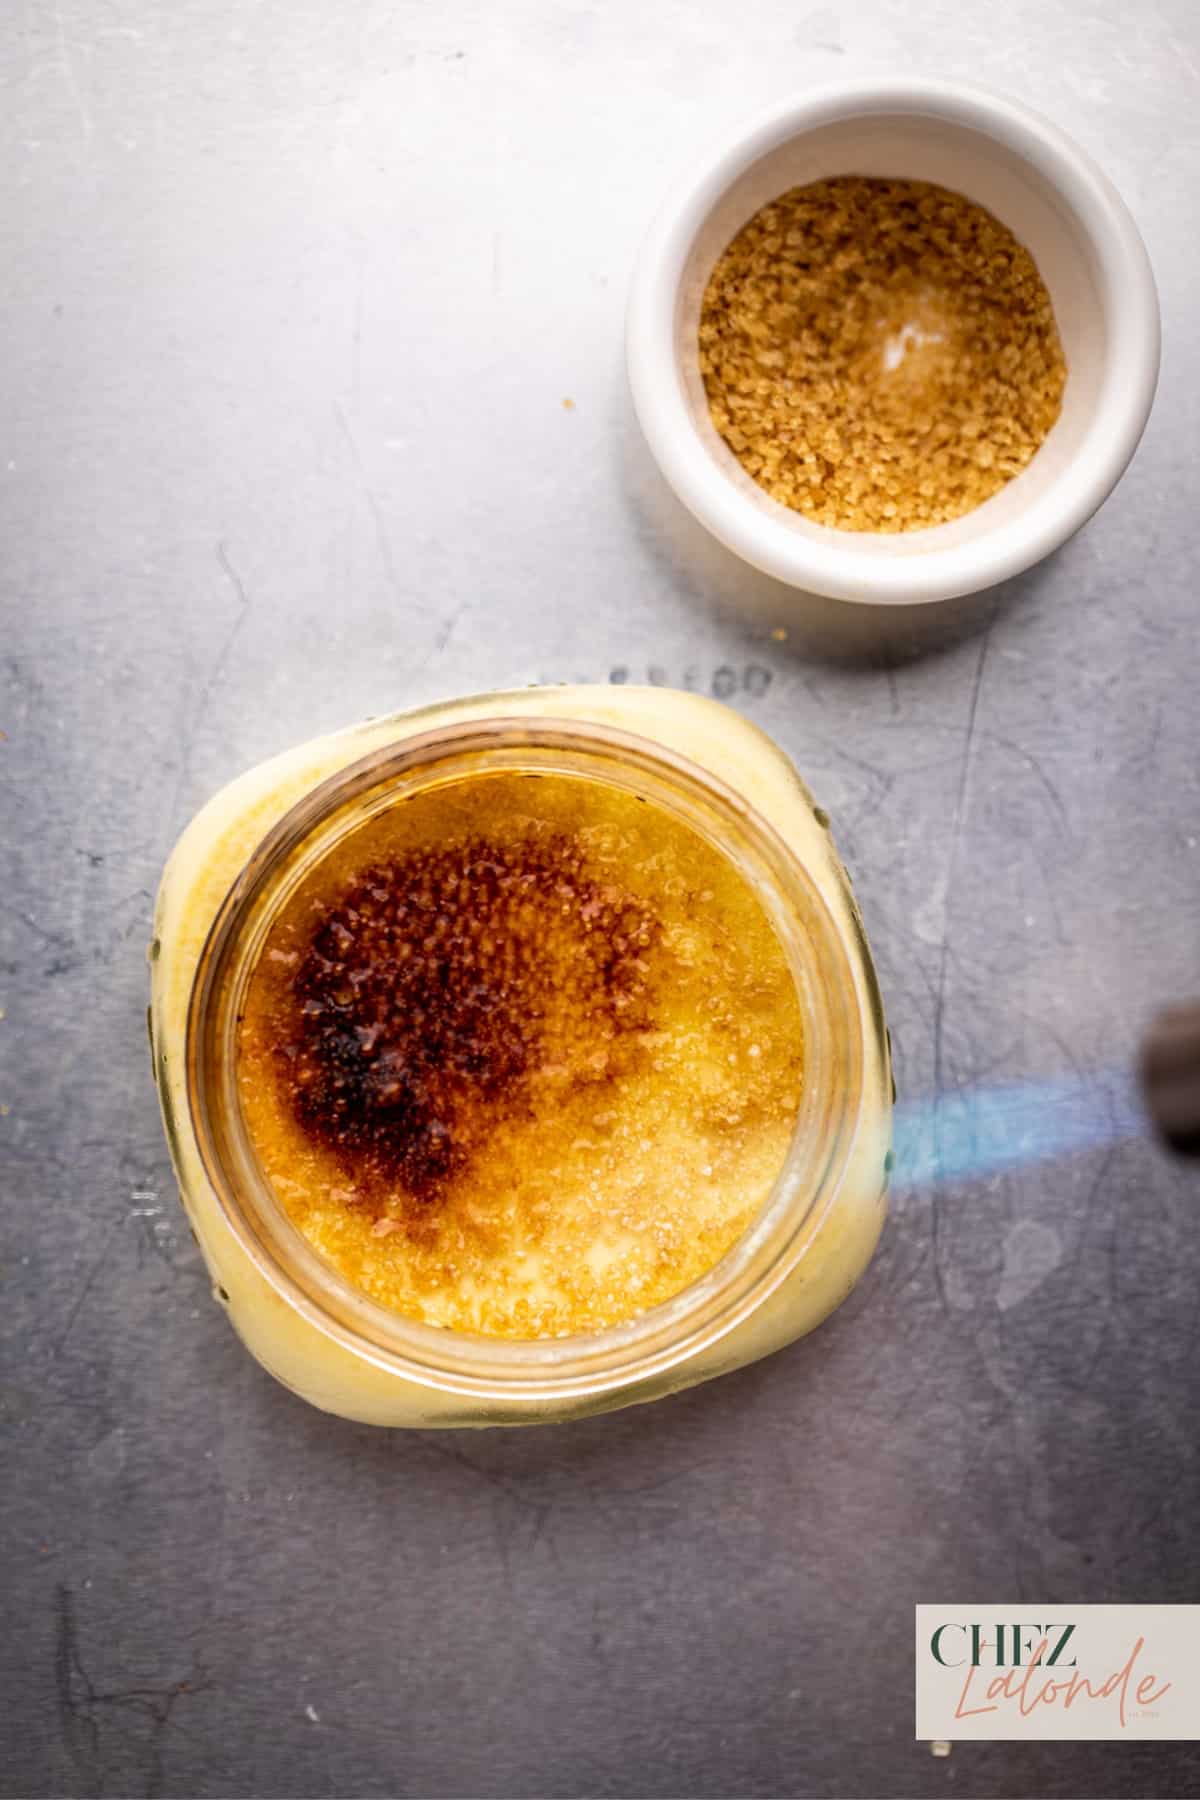 Use the kitchen torch to caramelize the custard surface to create the Brulee effect.